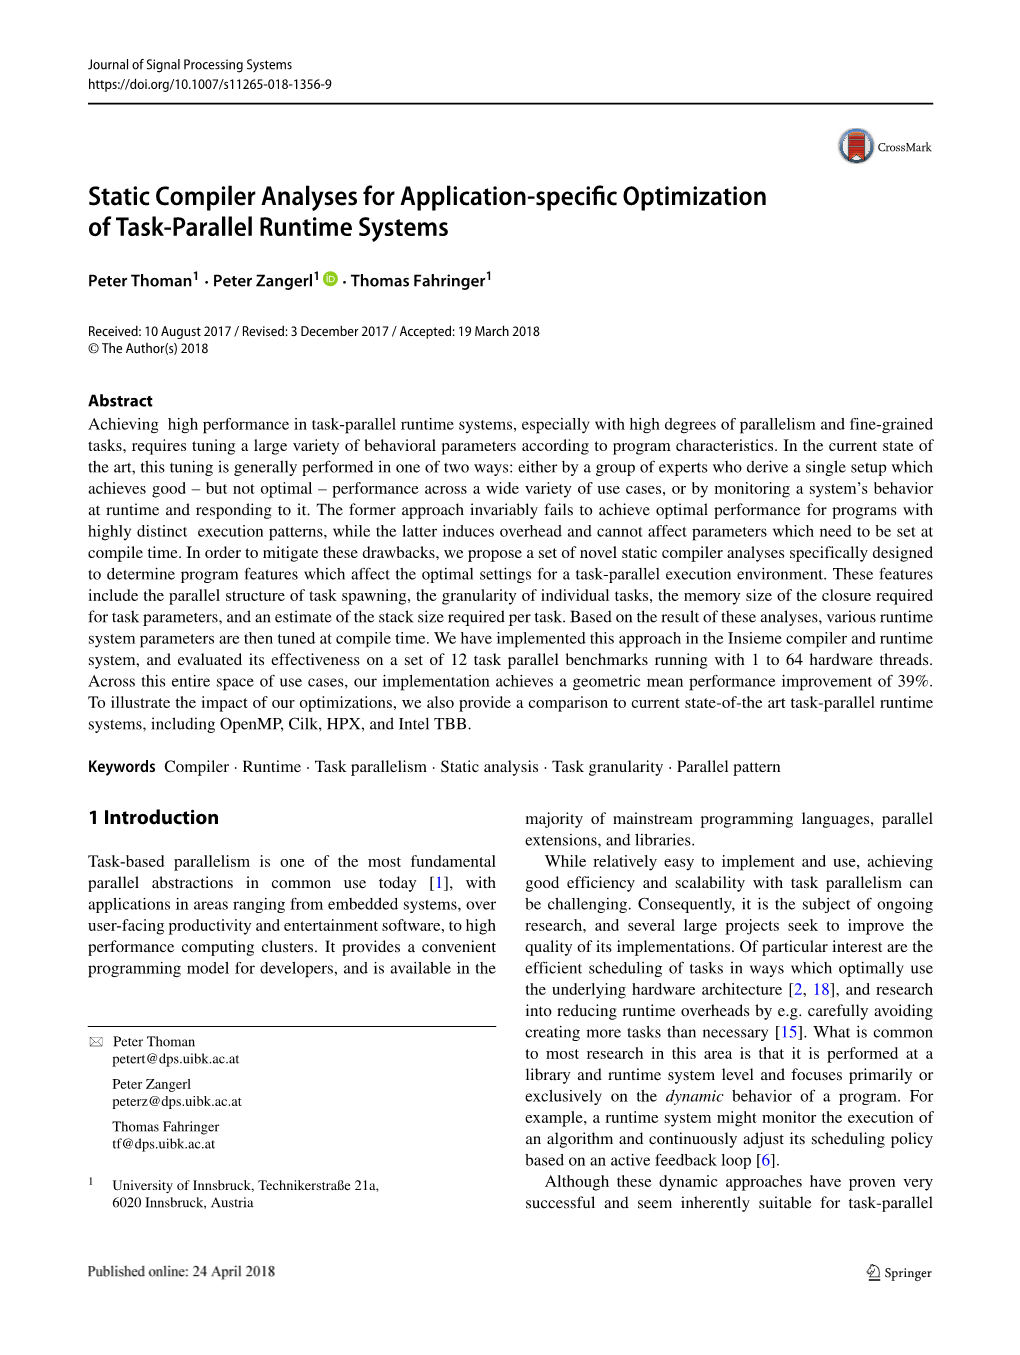 Static Compiler Analyses for Application-Specific Optimization of Task-Parallel Runtime Systems